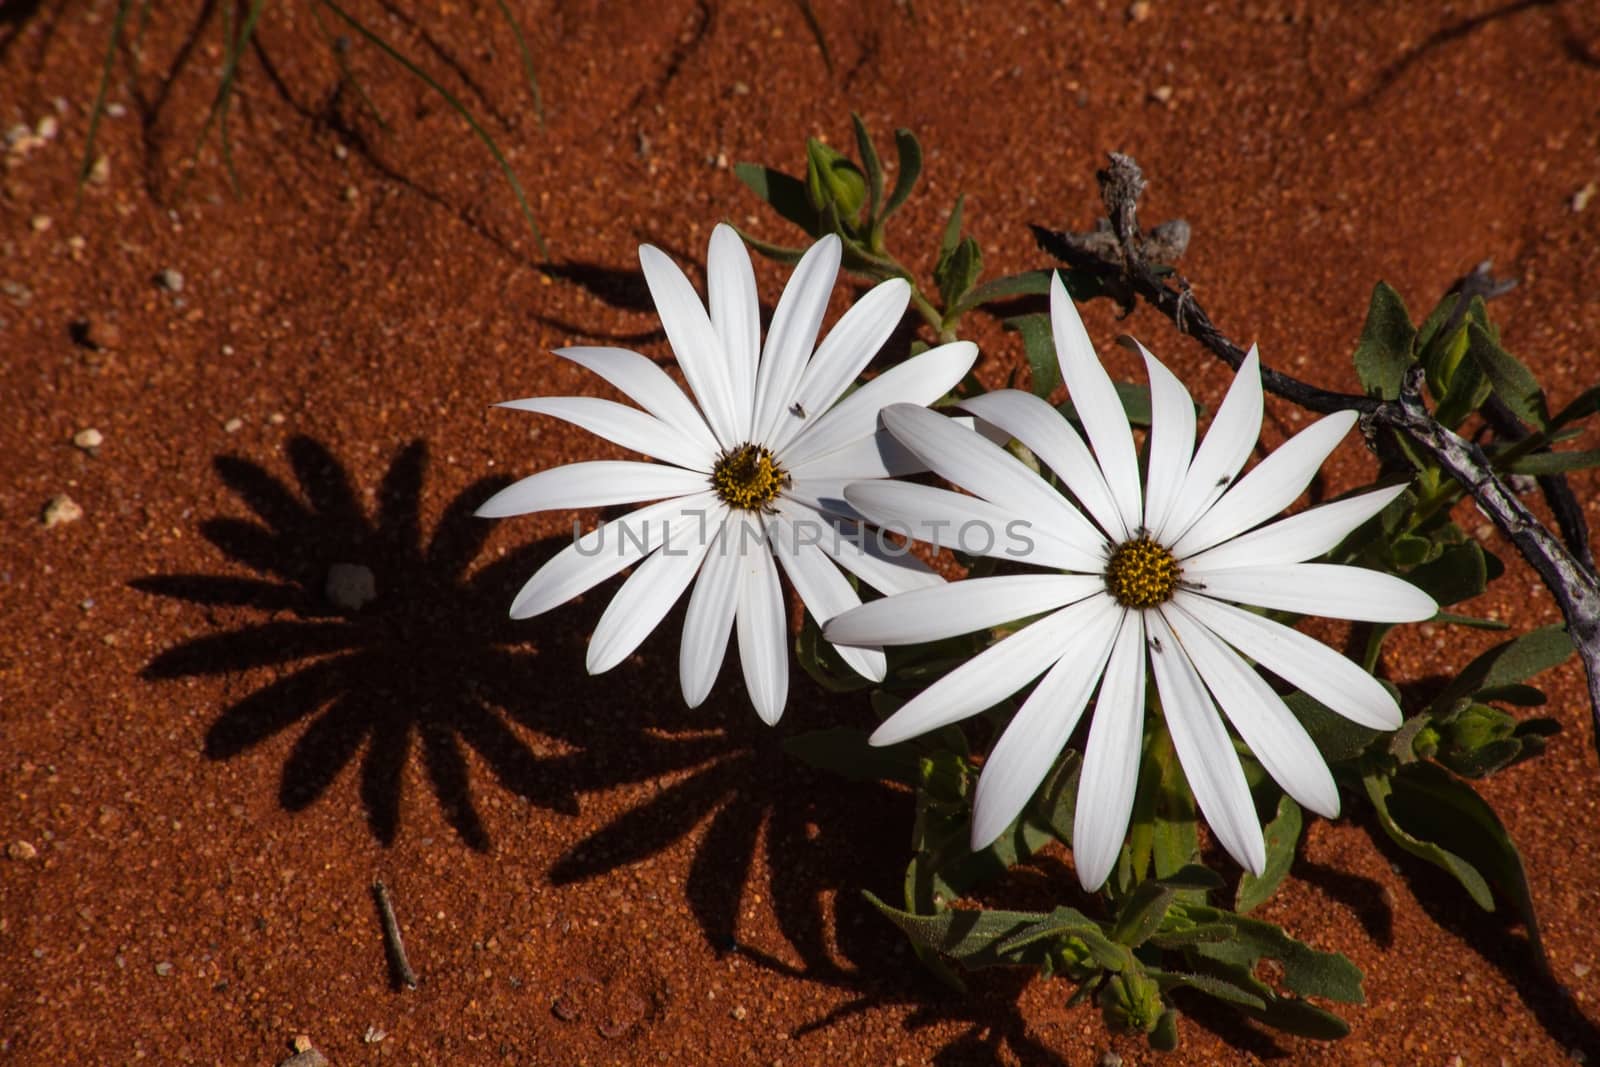 White Daisies on red sand form part of the spring floral show in the Namaqualand regeon of South Africa.